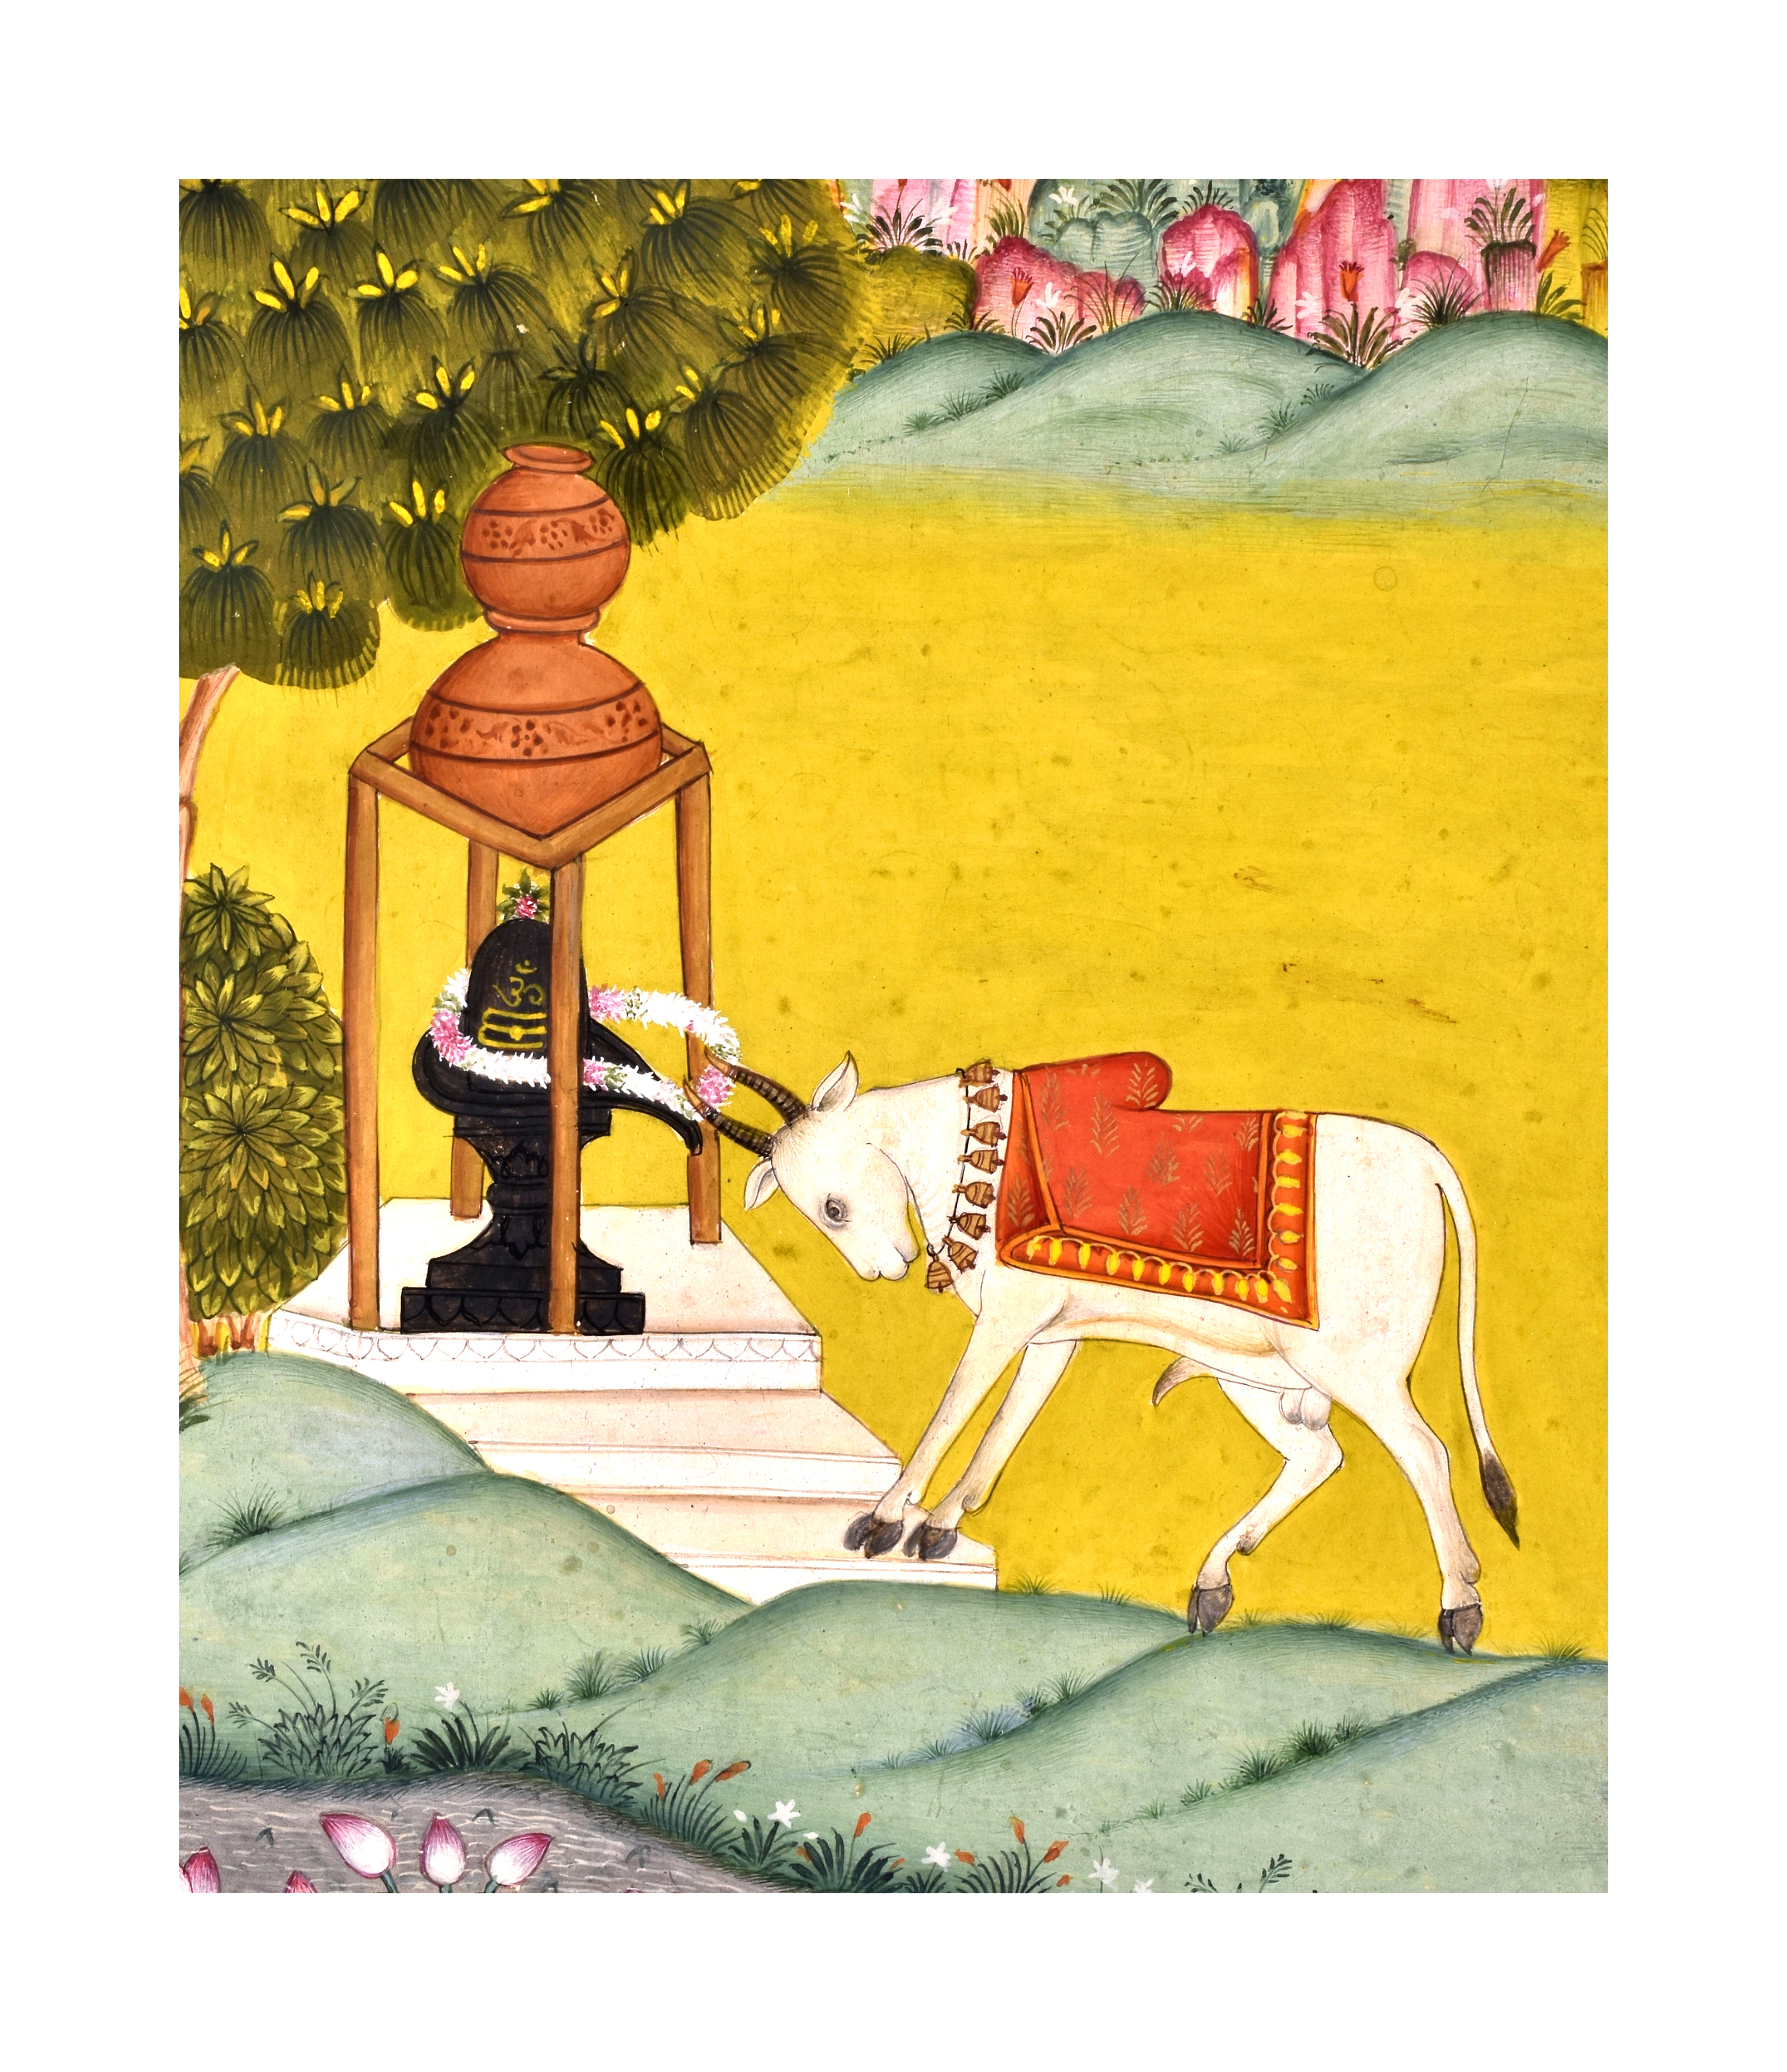 AN UNUSUAL PAHARI/BILASPUR PAINTING OF NANDI HONOURING LORD SHIVA WITH A GARLAND NEAR A LOTUS POND, - Image 2 of 3